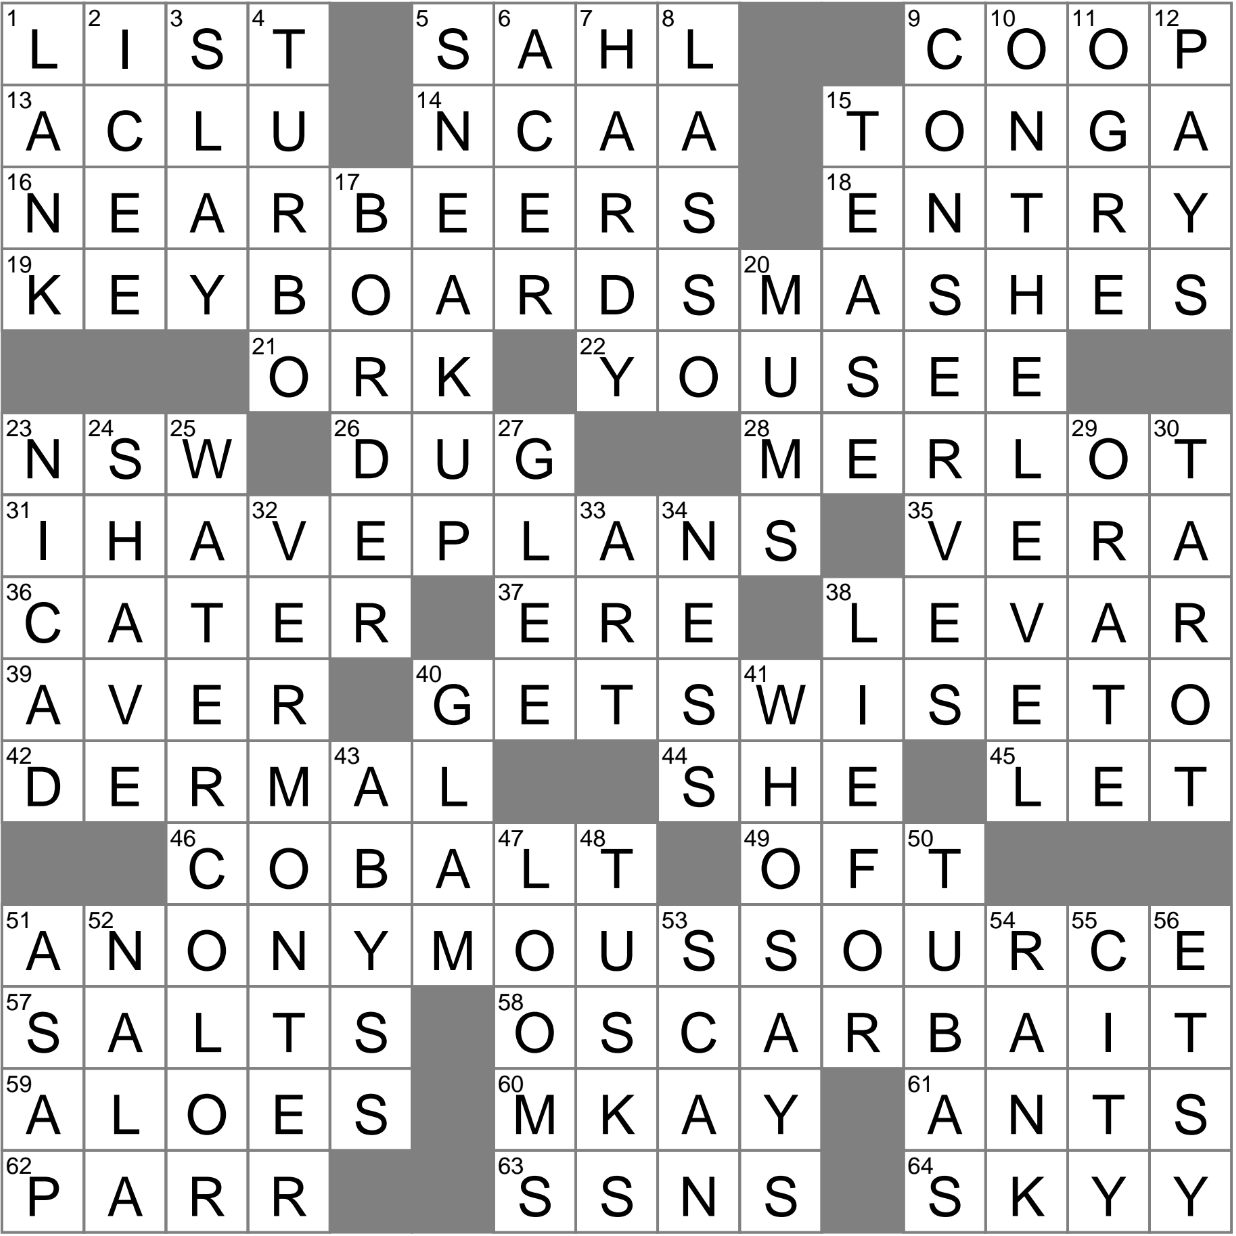 Comedian profiled in Last Man Standing crossword clue Archives